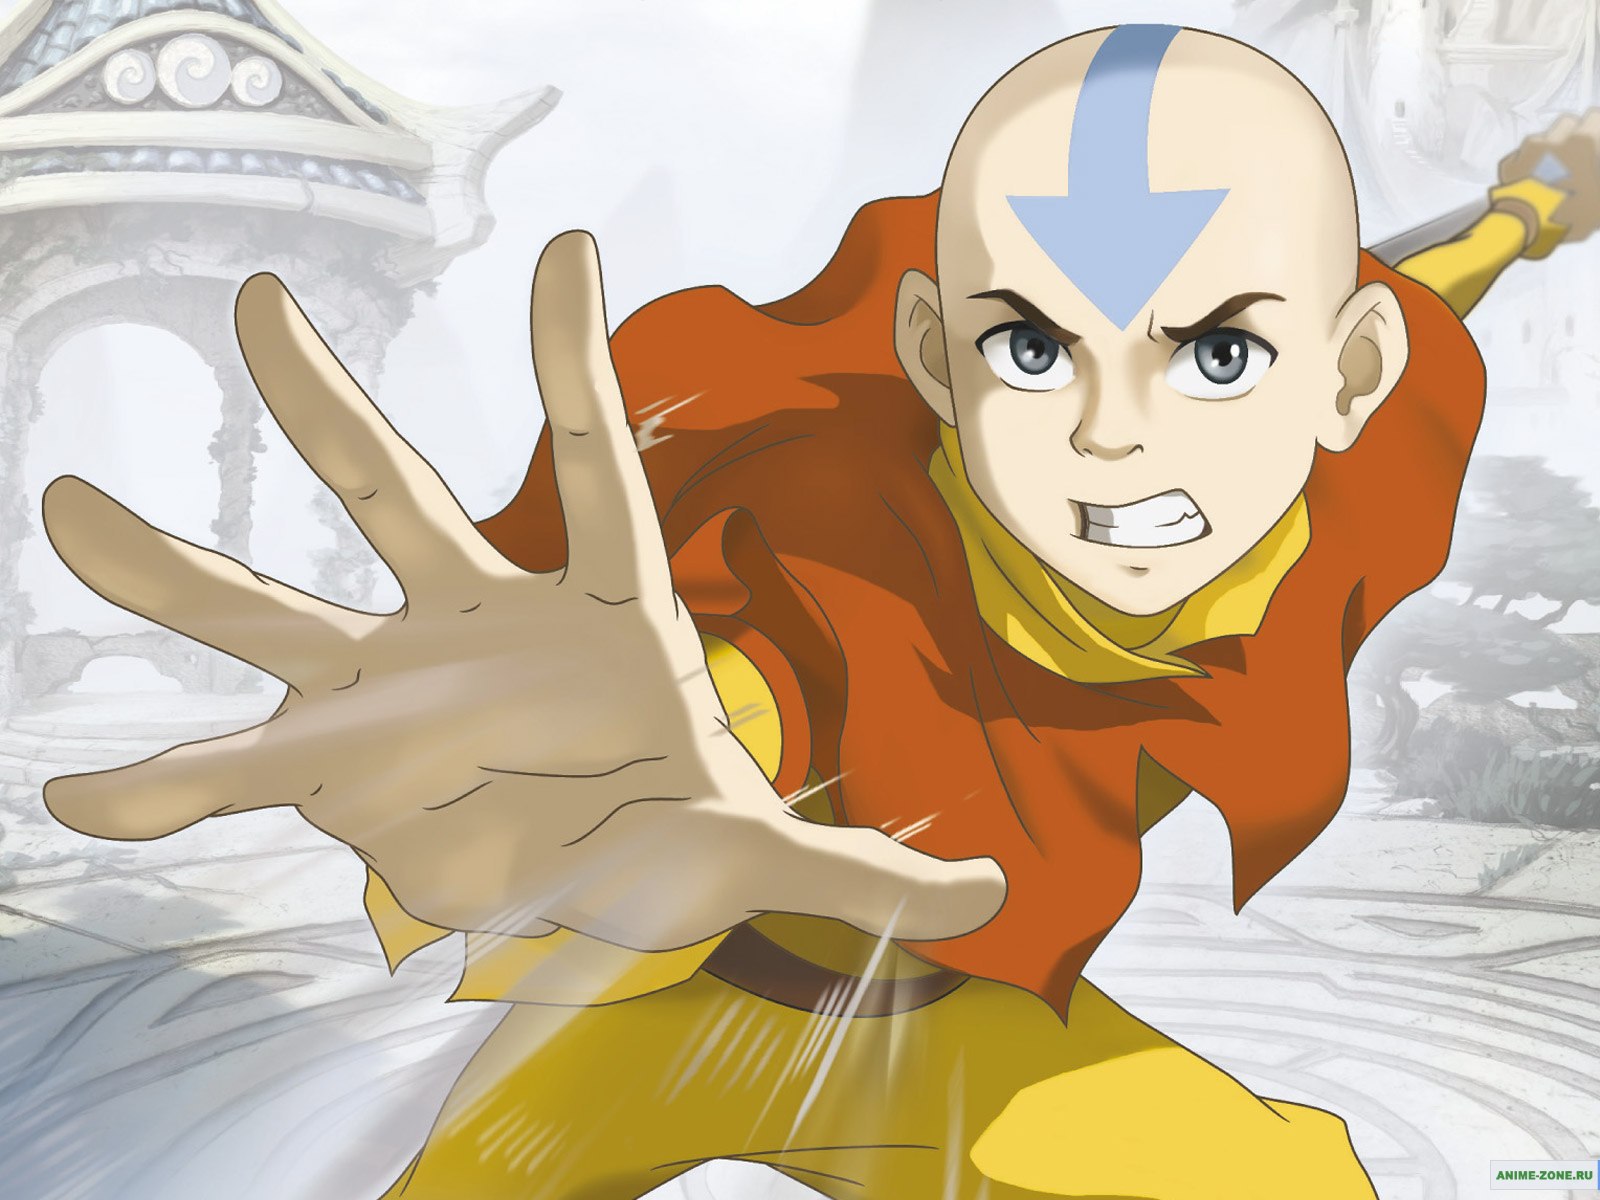 Avatar the last airbender download